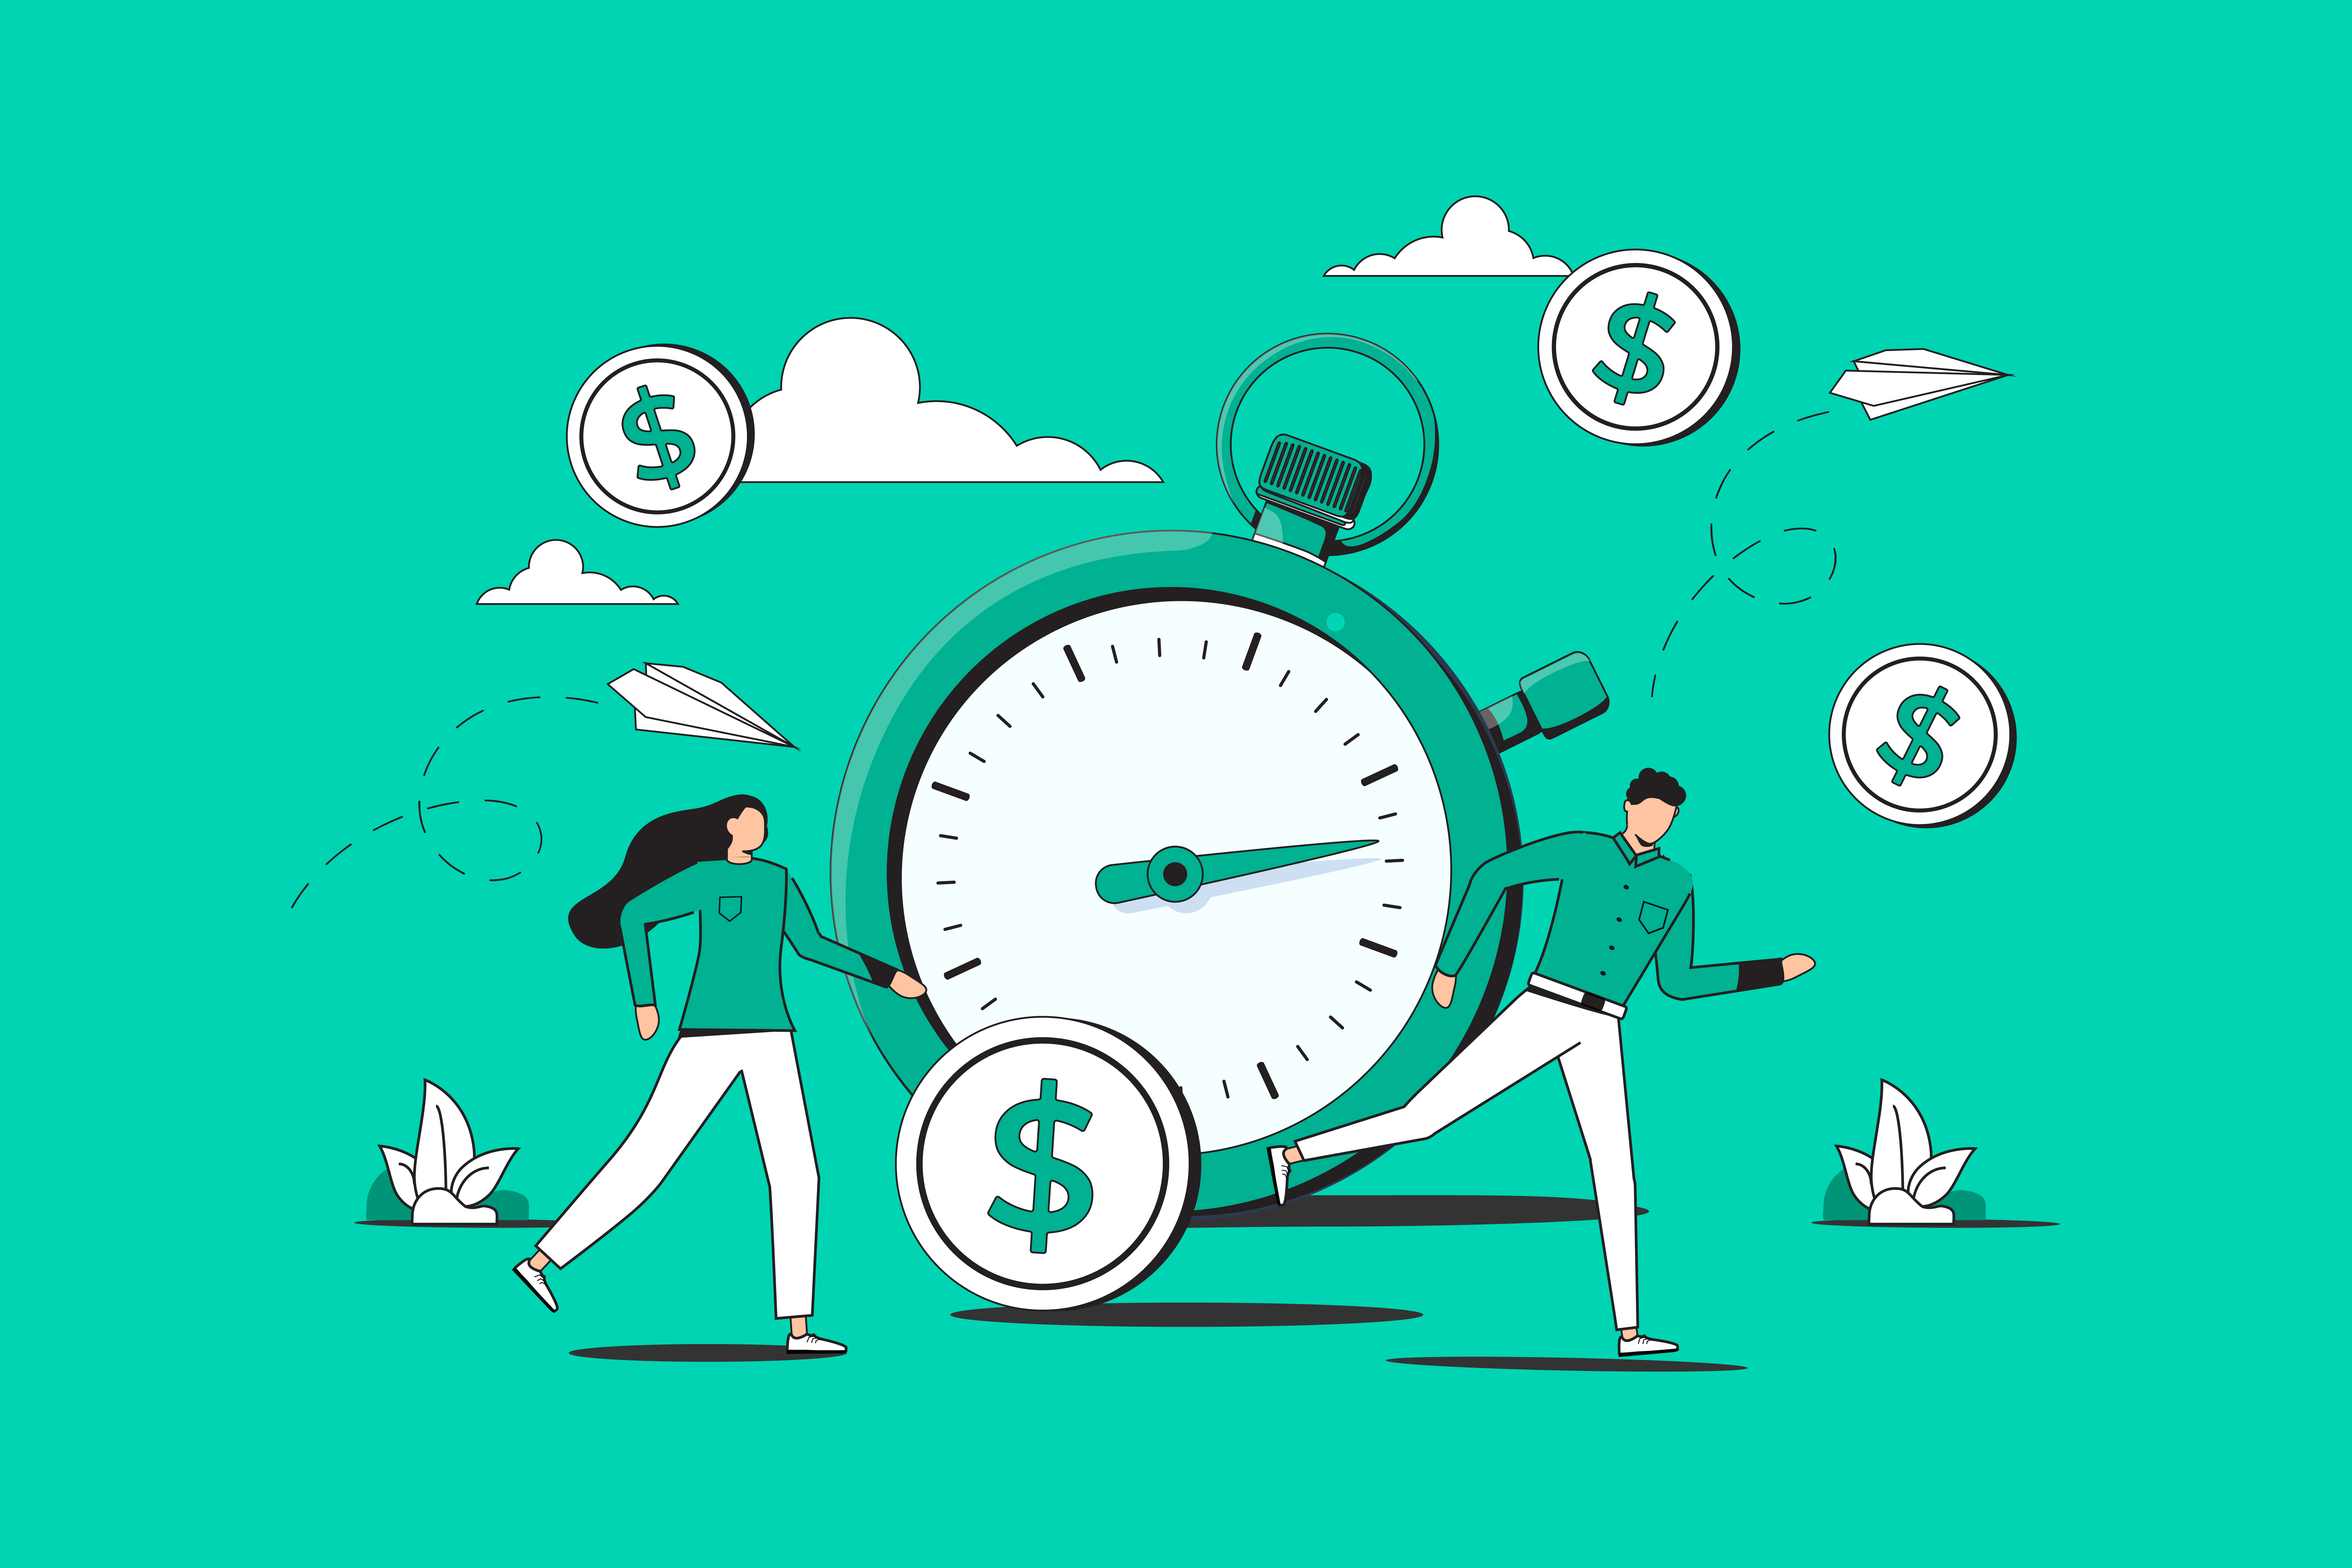 Illustration for a blog featuring two people with a large clock and flying money, representing the concept of time management, efficiency, or the relationship between time and money.